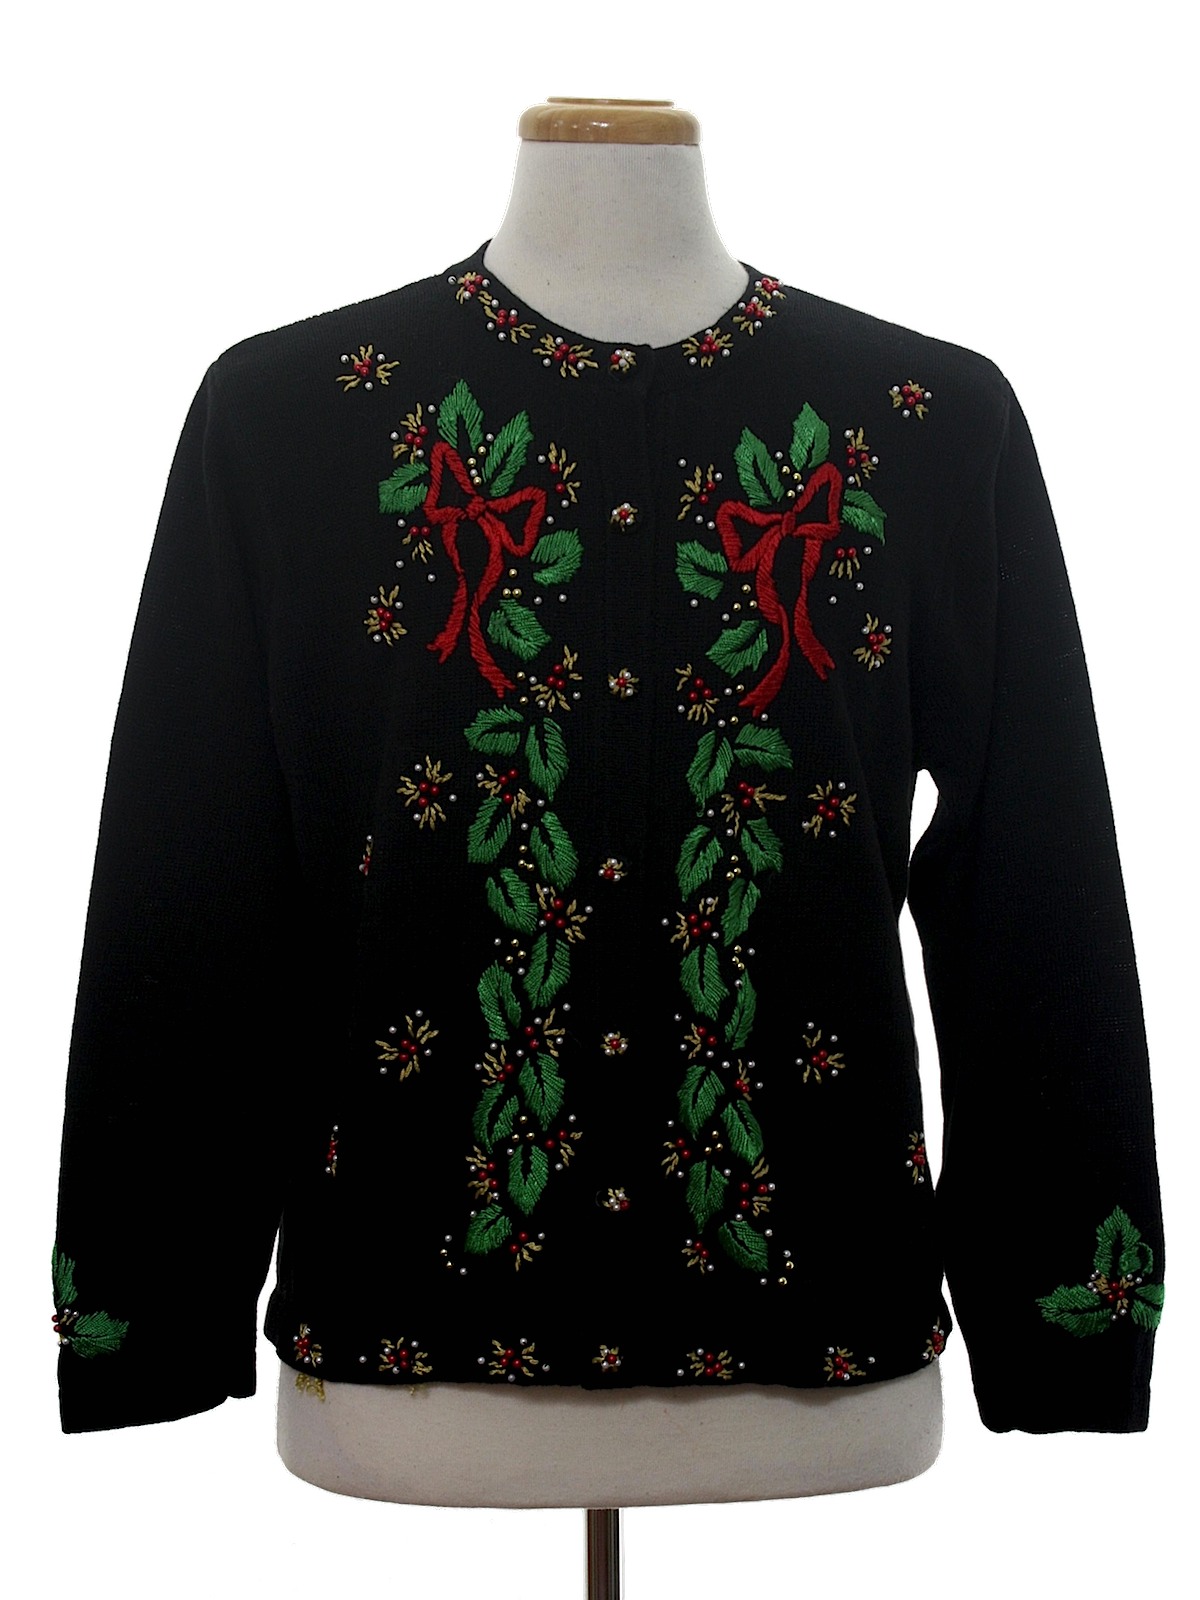 Womens Ugly Christmas Sweater: -BP Design- Womens black background ...